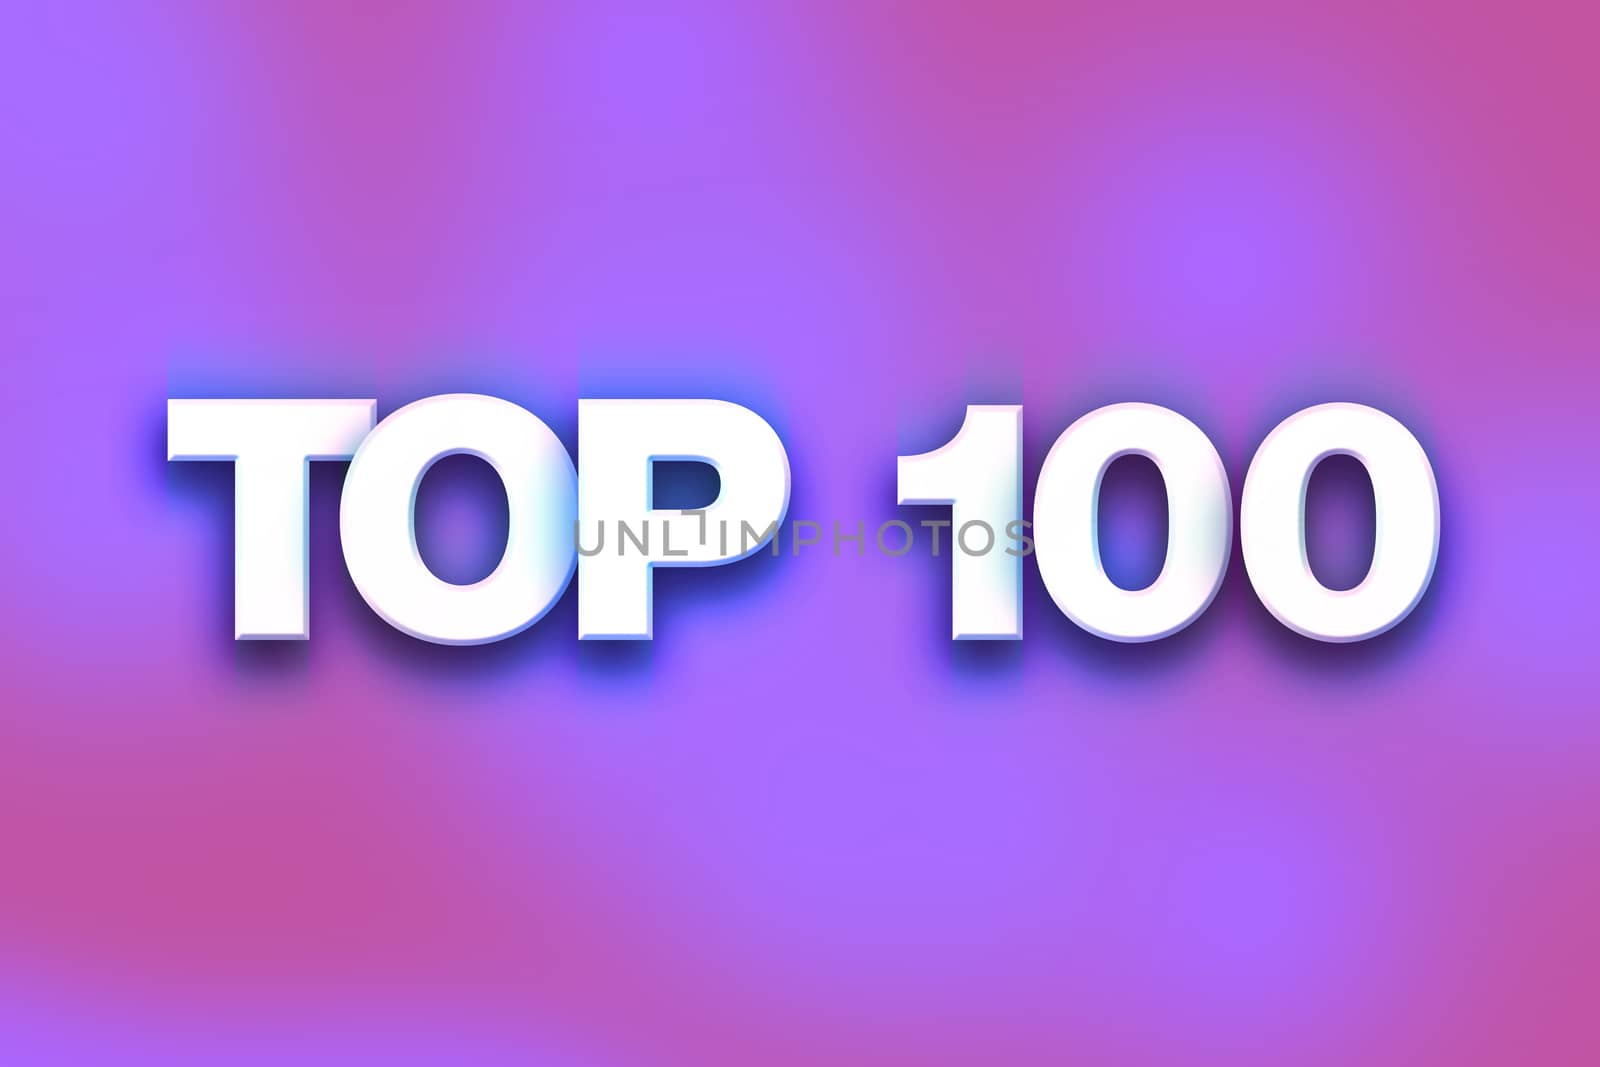 The word "Top 100" written in white 3D letters on a colorful background concept and theme.